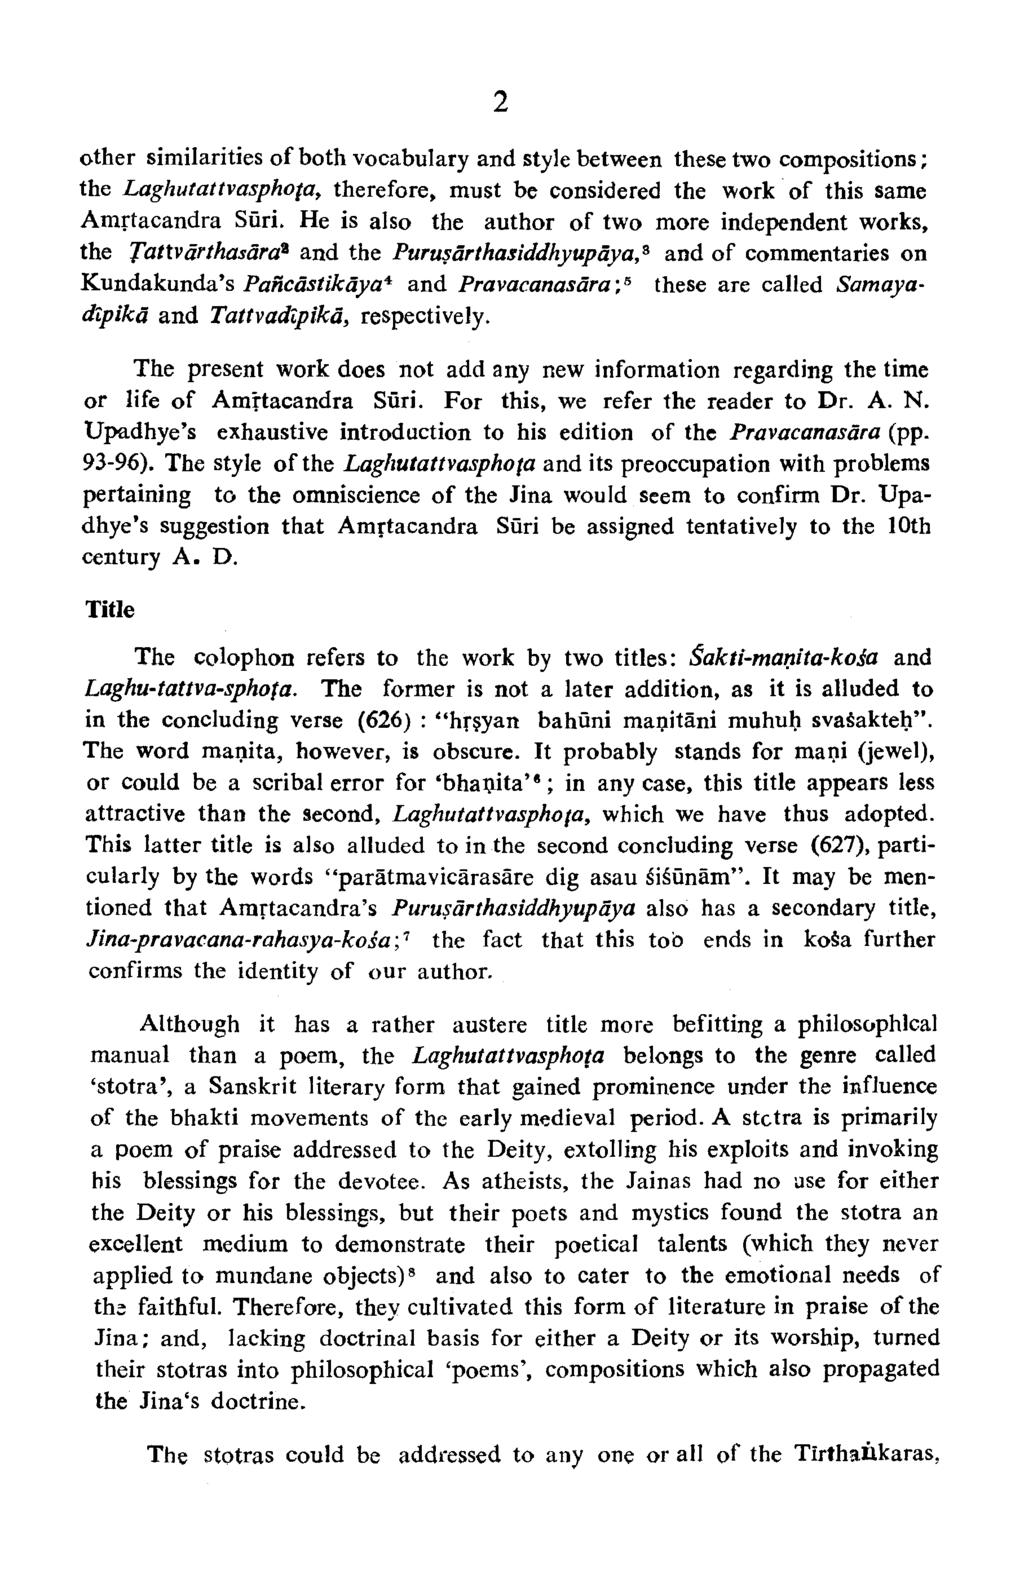 2 other similarities of both vocabulary and style between these two compositions; the Laghutattvasphota, therefore, must be considered the work of this same Amrtacandra Suri.